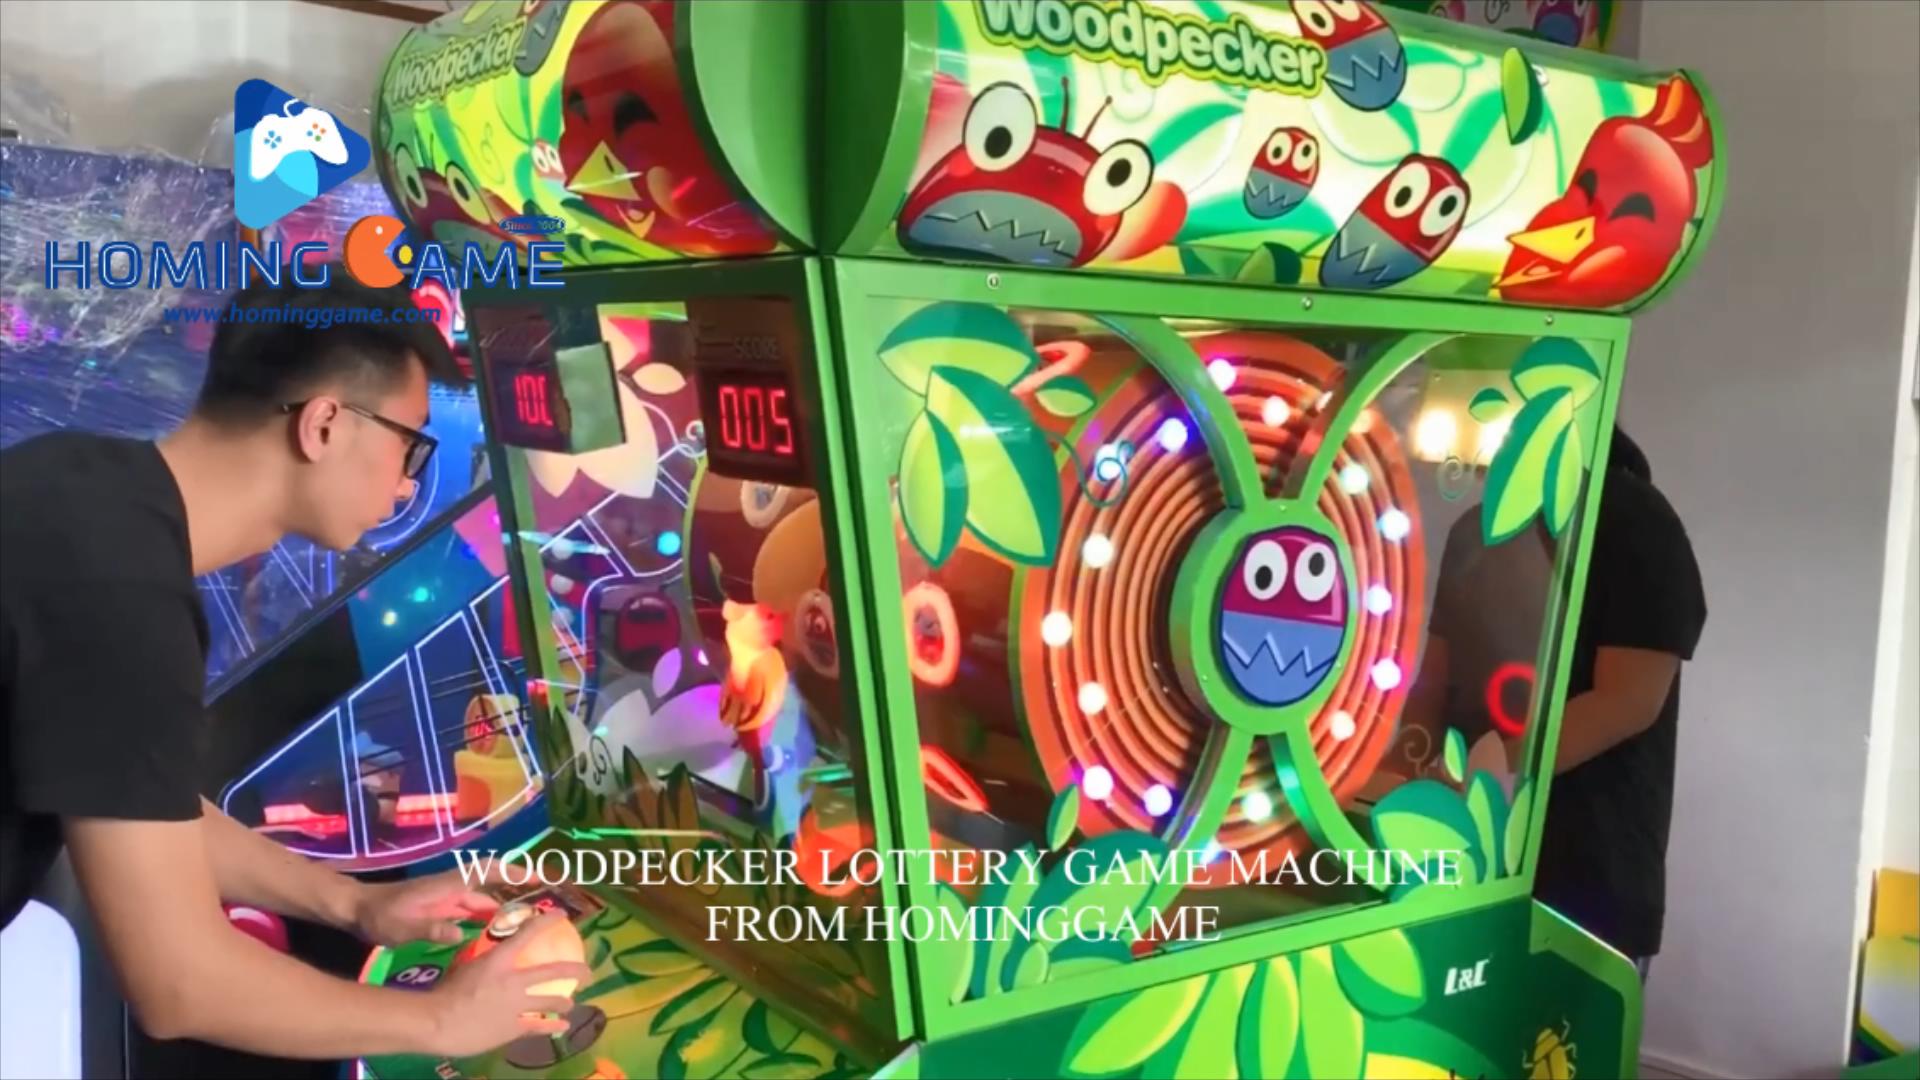 December HomingGame New Released WoodPecker Lottery Game Machine